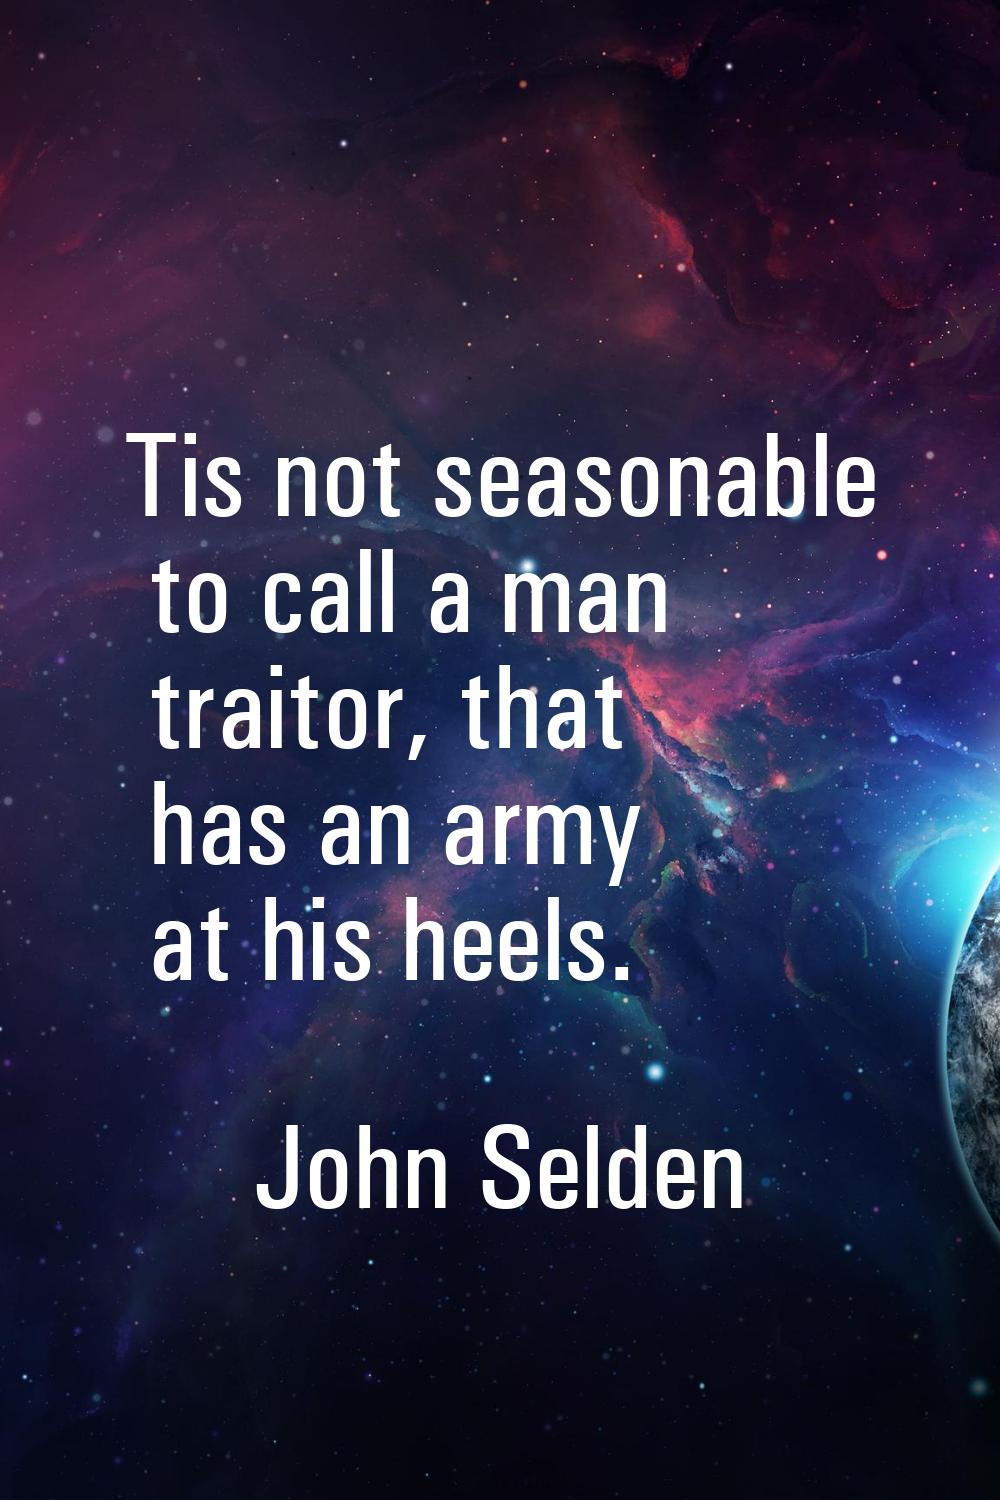 Tis not seasonable to call a man traitor, that has an army at his heels.